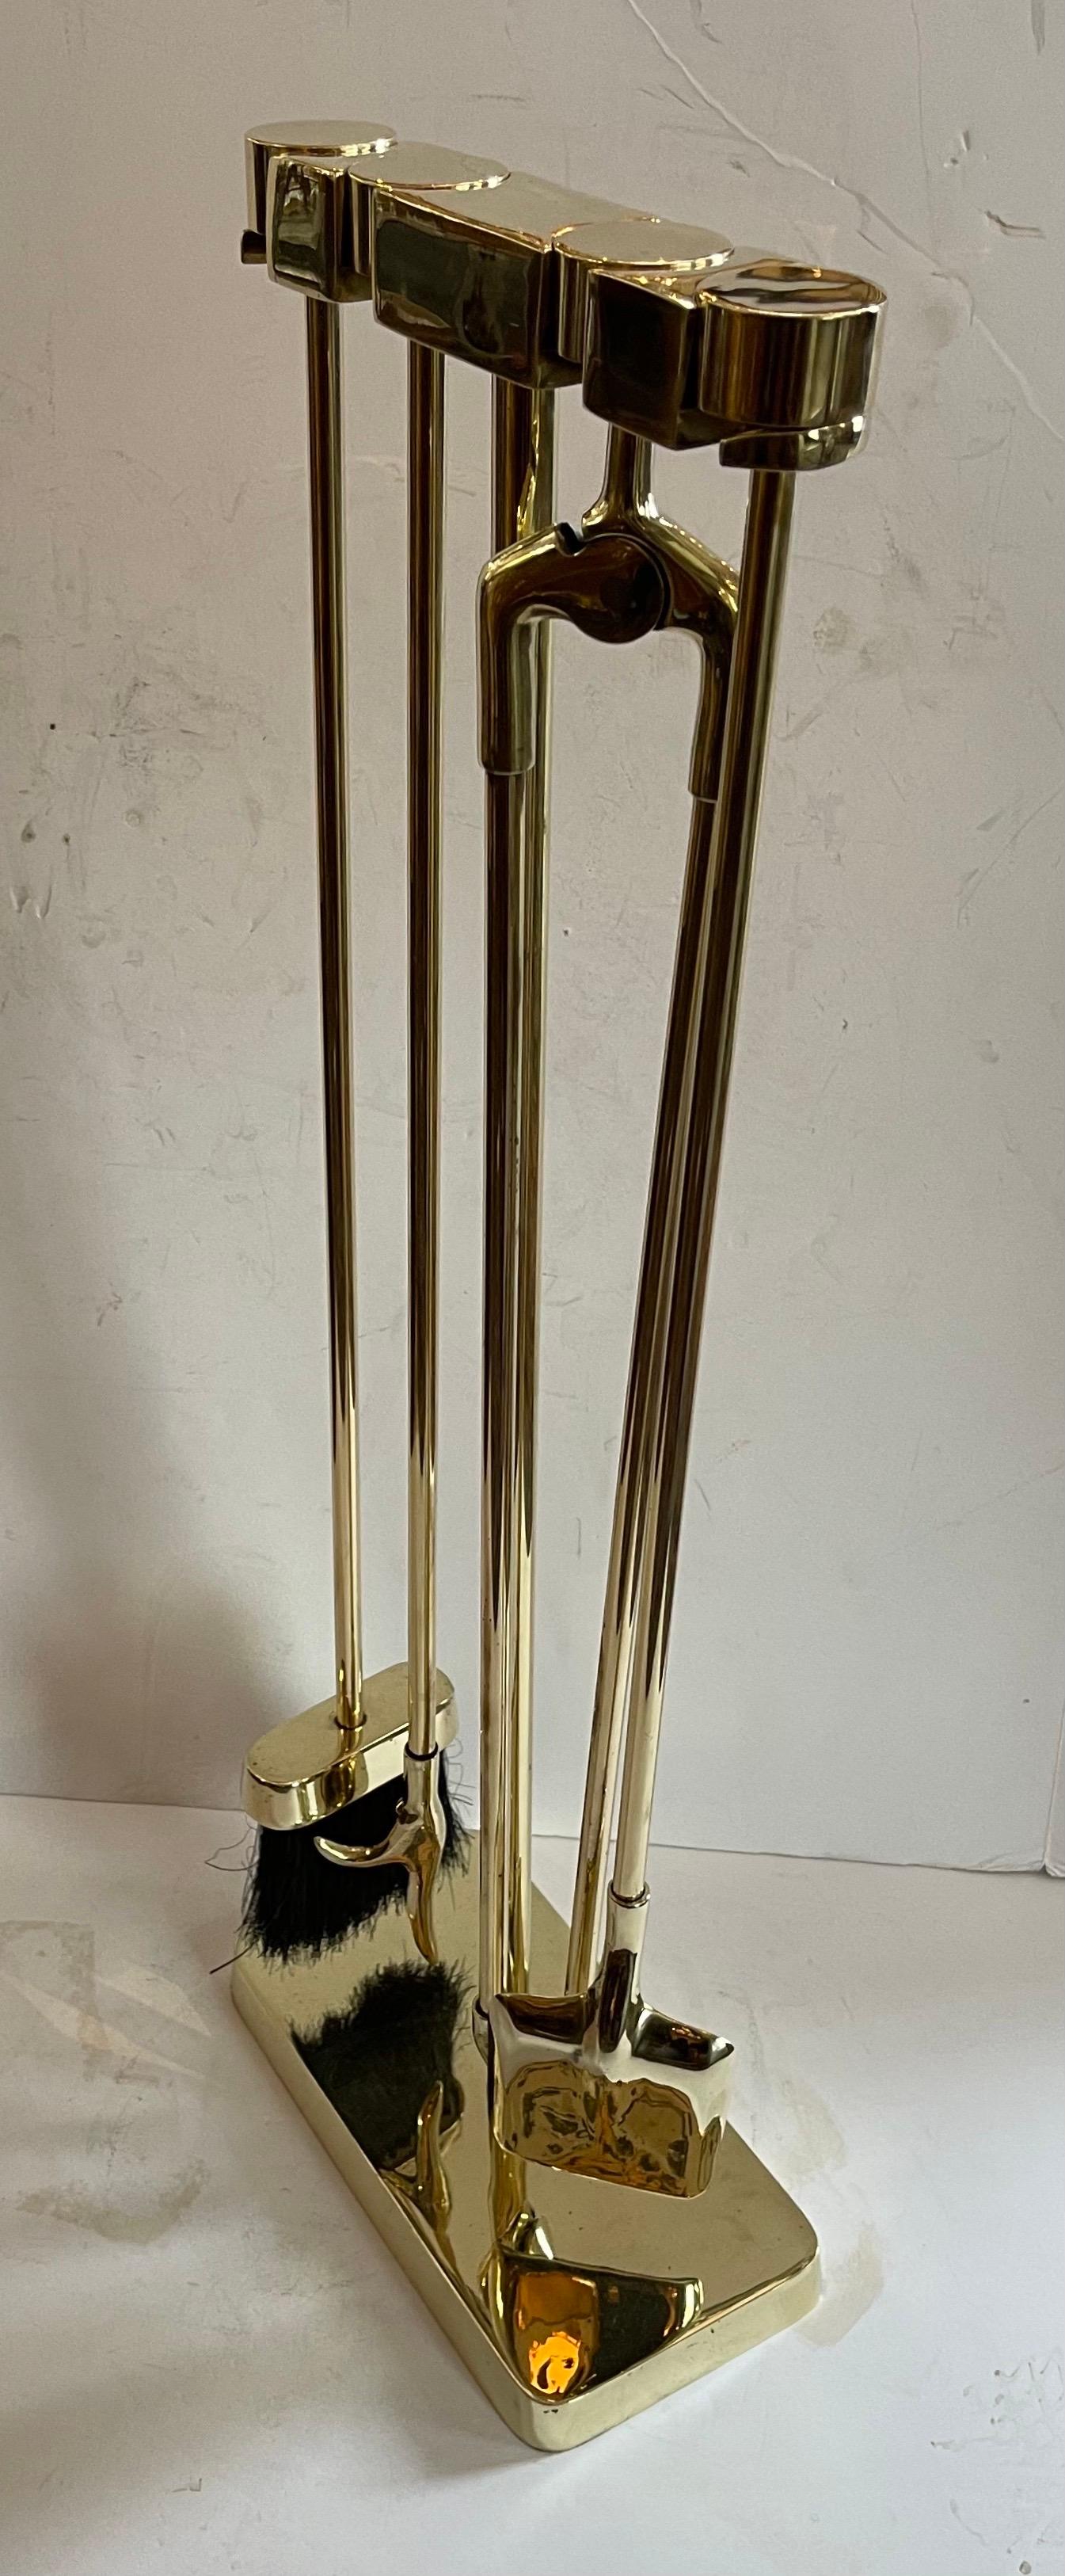 20th Century Wonderful Mid-Century Modern Polished Brass Fireplace Fire Place Tool Set For Sale